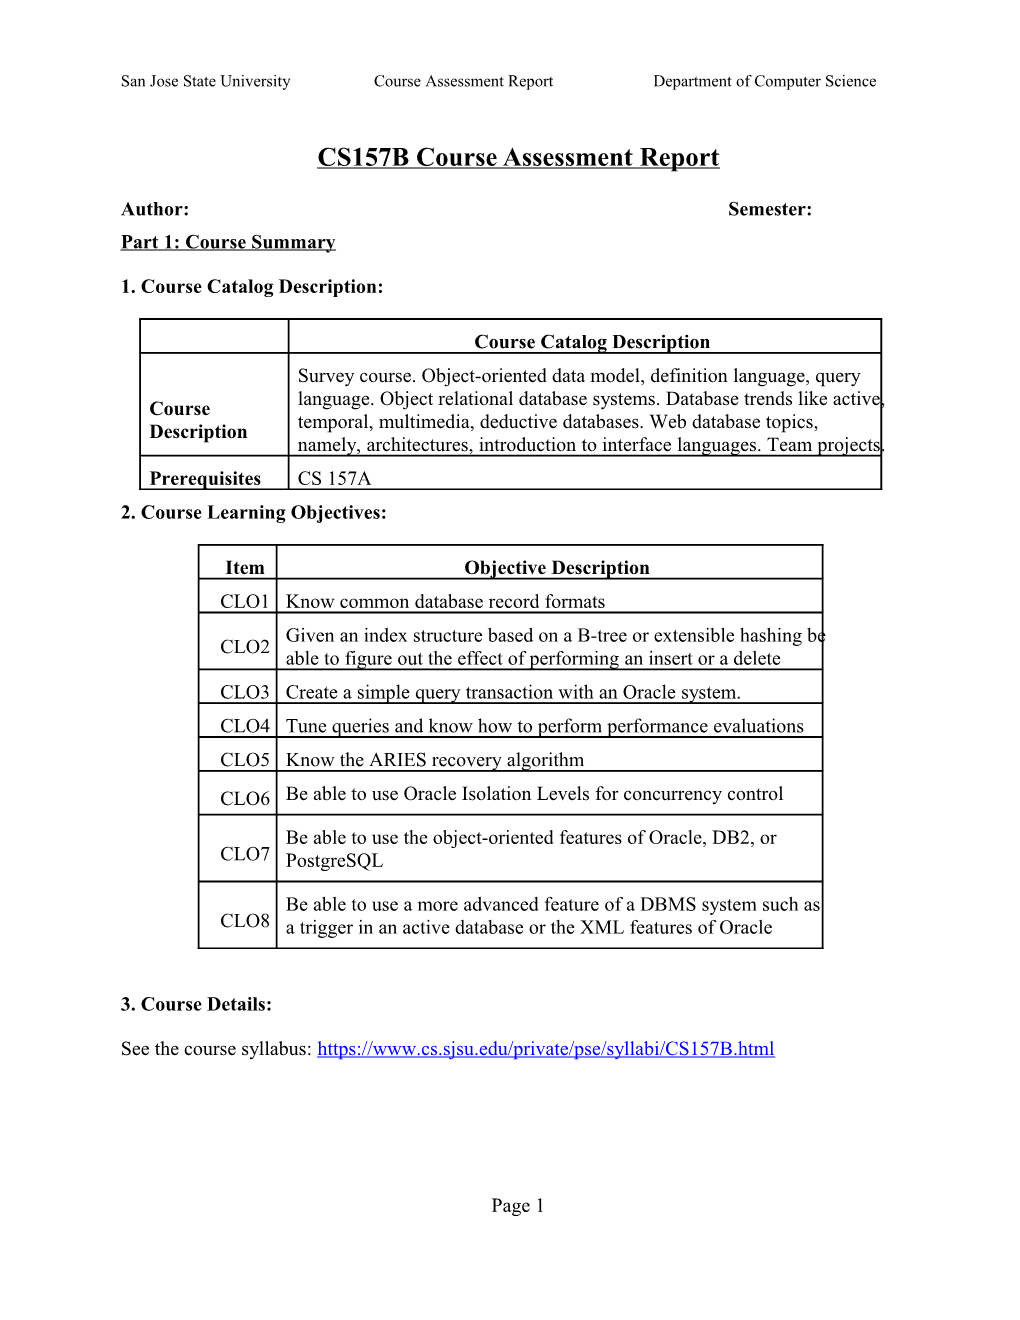 San Jose State University Computer Engineering Department CMPE131 Course Assessment Report